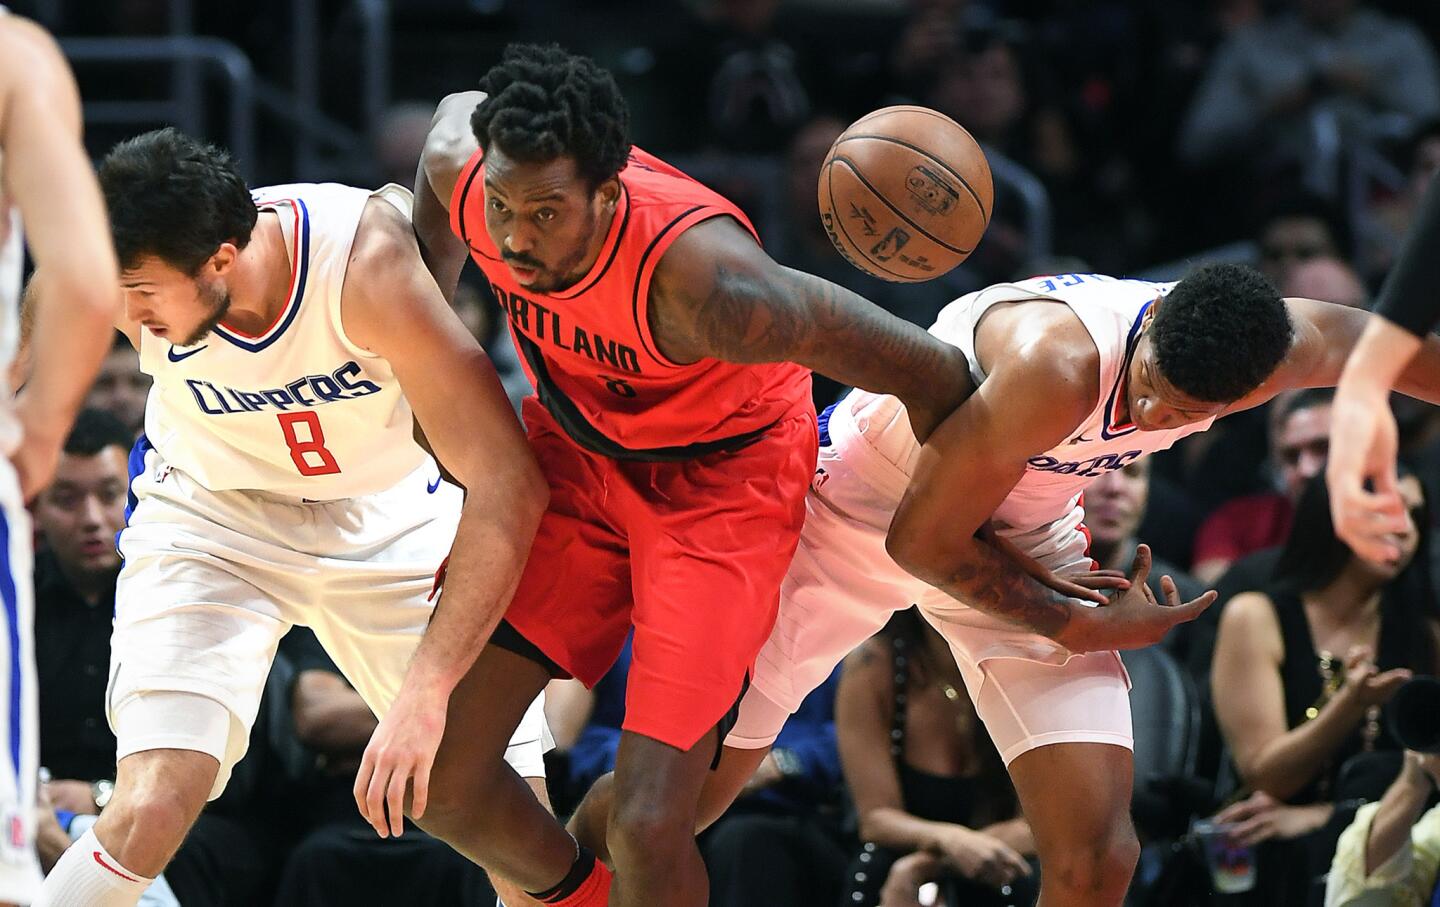 Clippers Danilo Gallinari, left, and Tyrone Wallace battle for a loose ball with Trail Blazers' Al-Farouq Aminu in the 4th quarter.